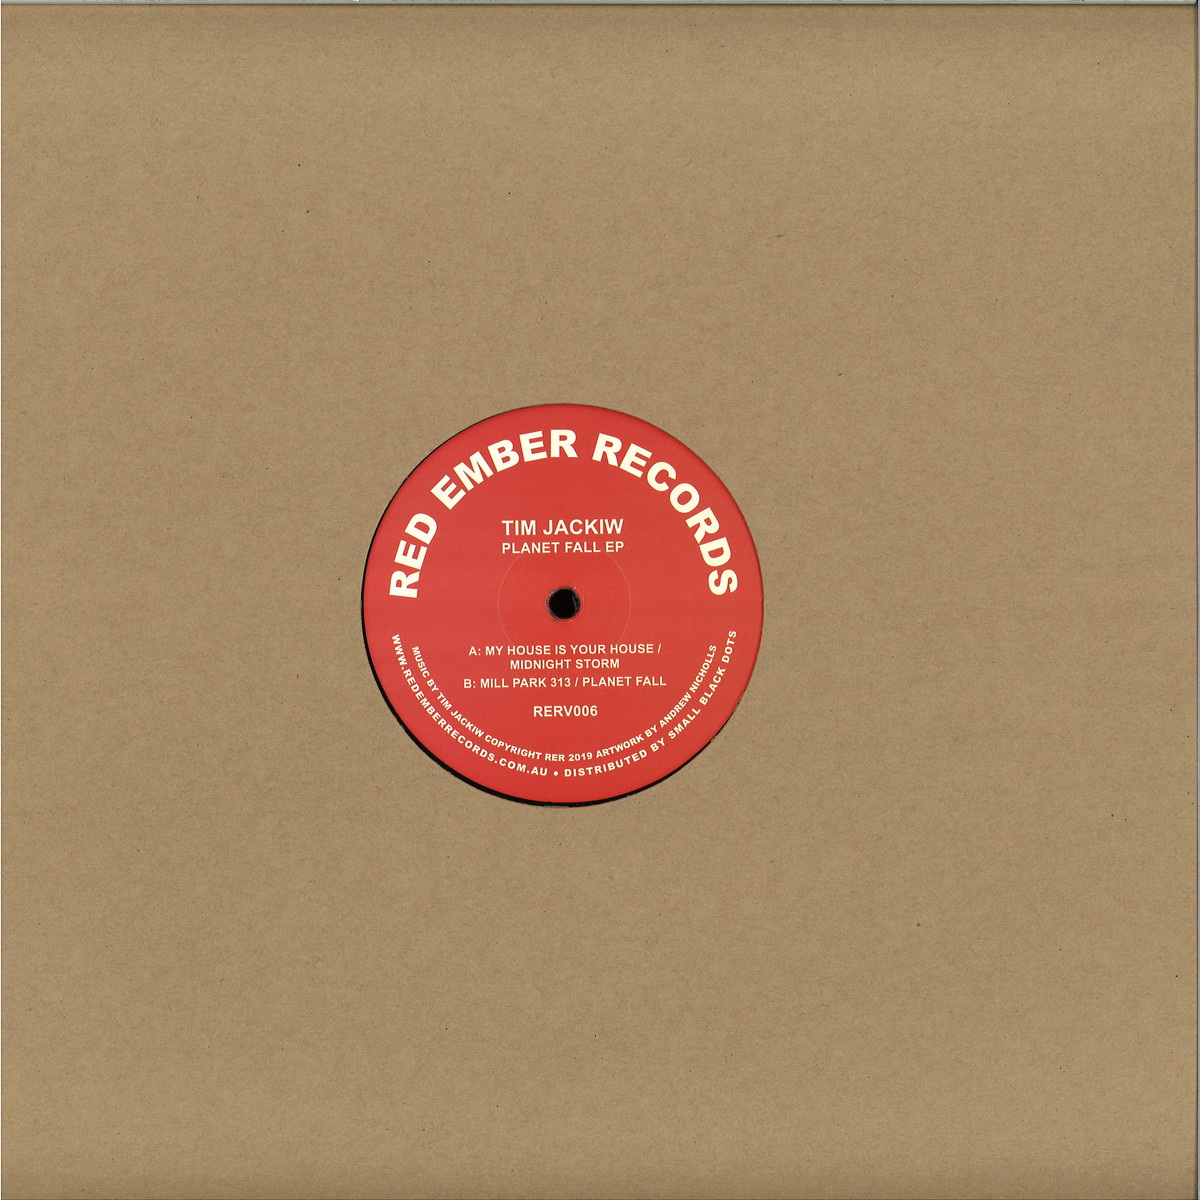 Tim Jackiw - Planet Fall EP / Red Ember Records RERV006 - Vinyl